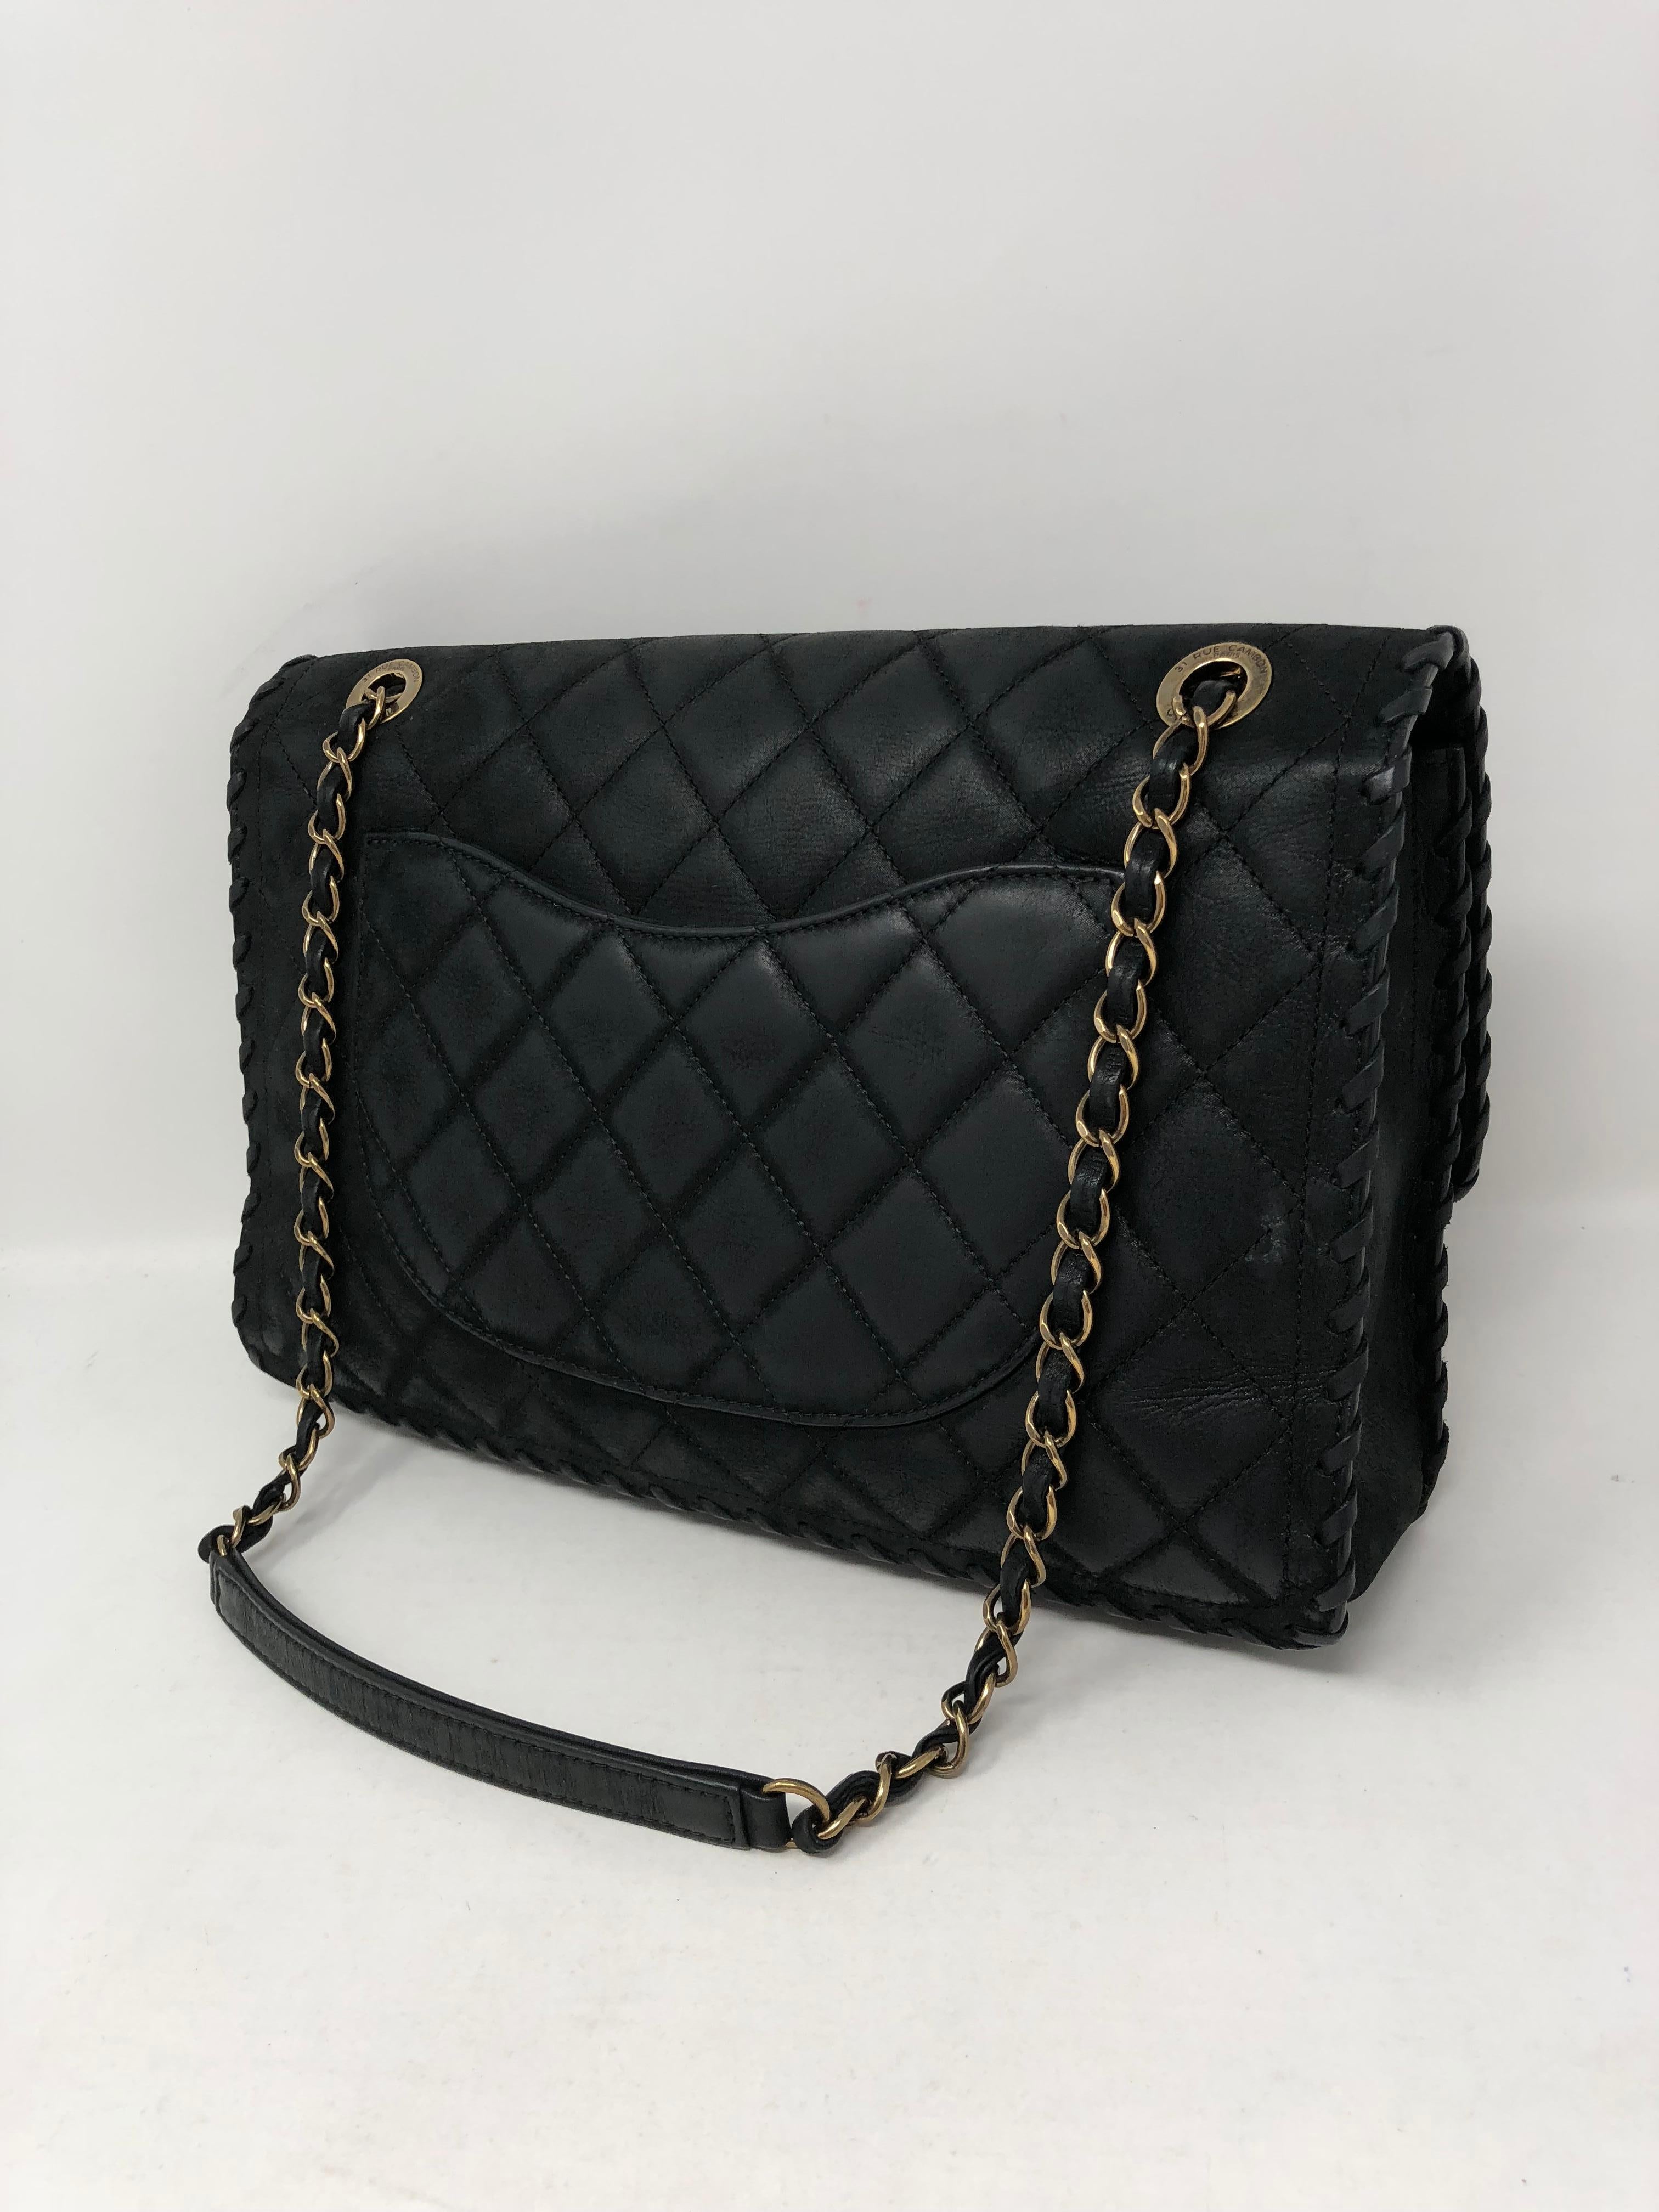 Women's or Men's Chanel Black Happy Stitch Limited Edition Jumbo Bag 